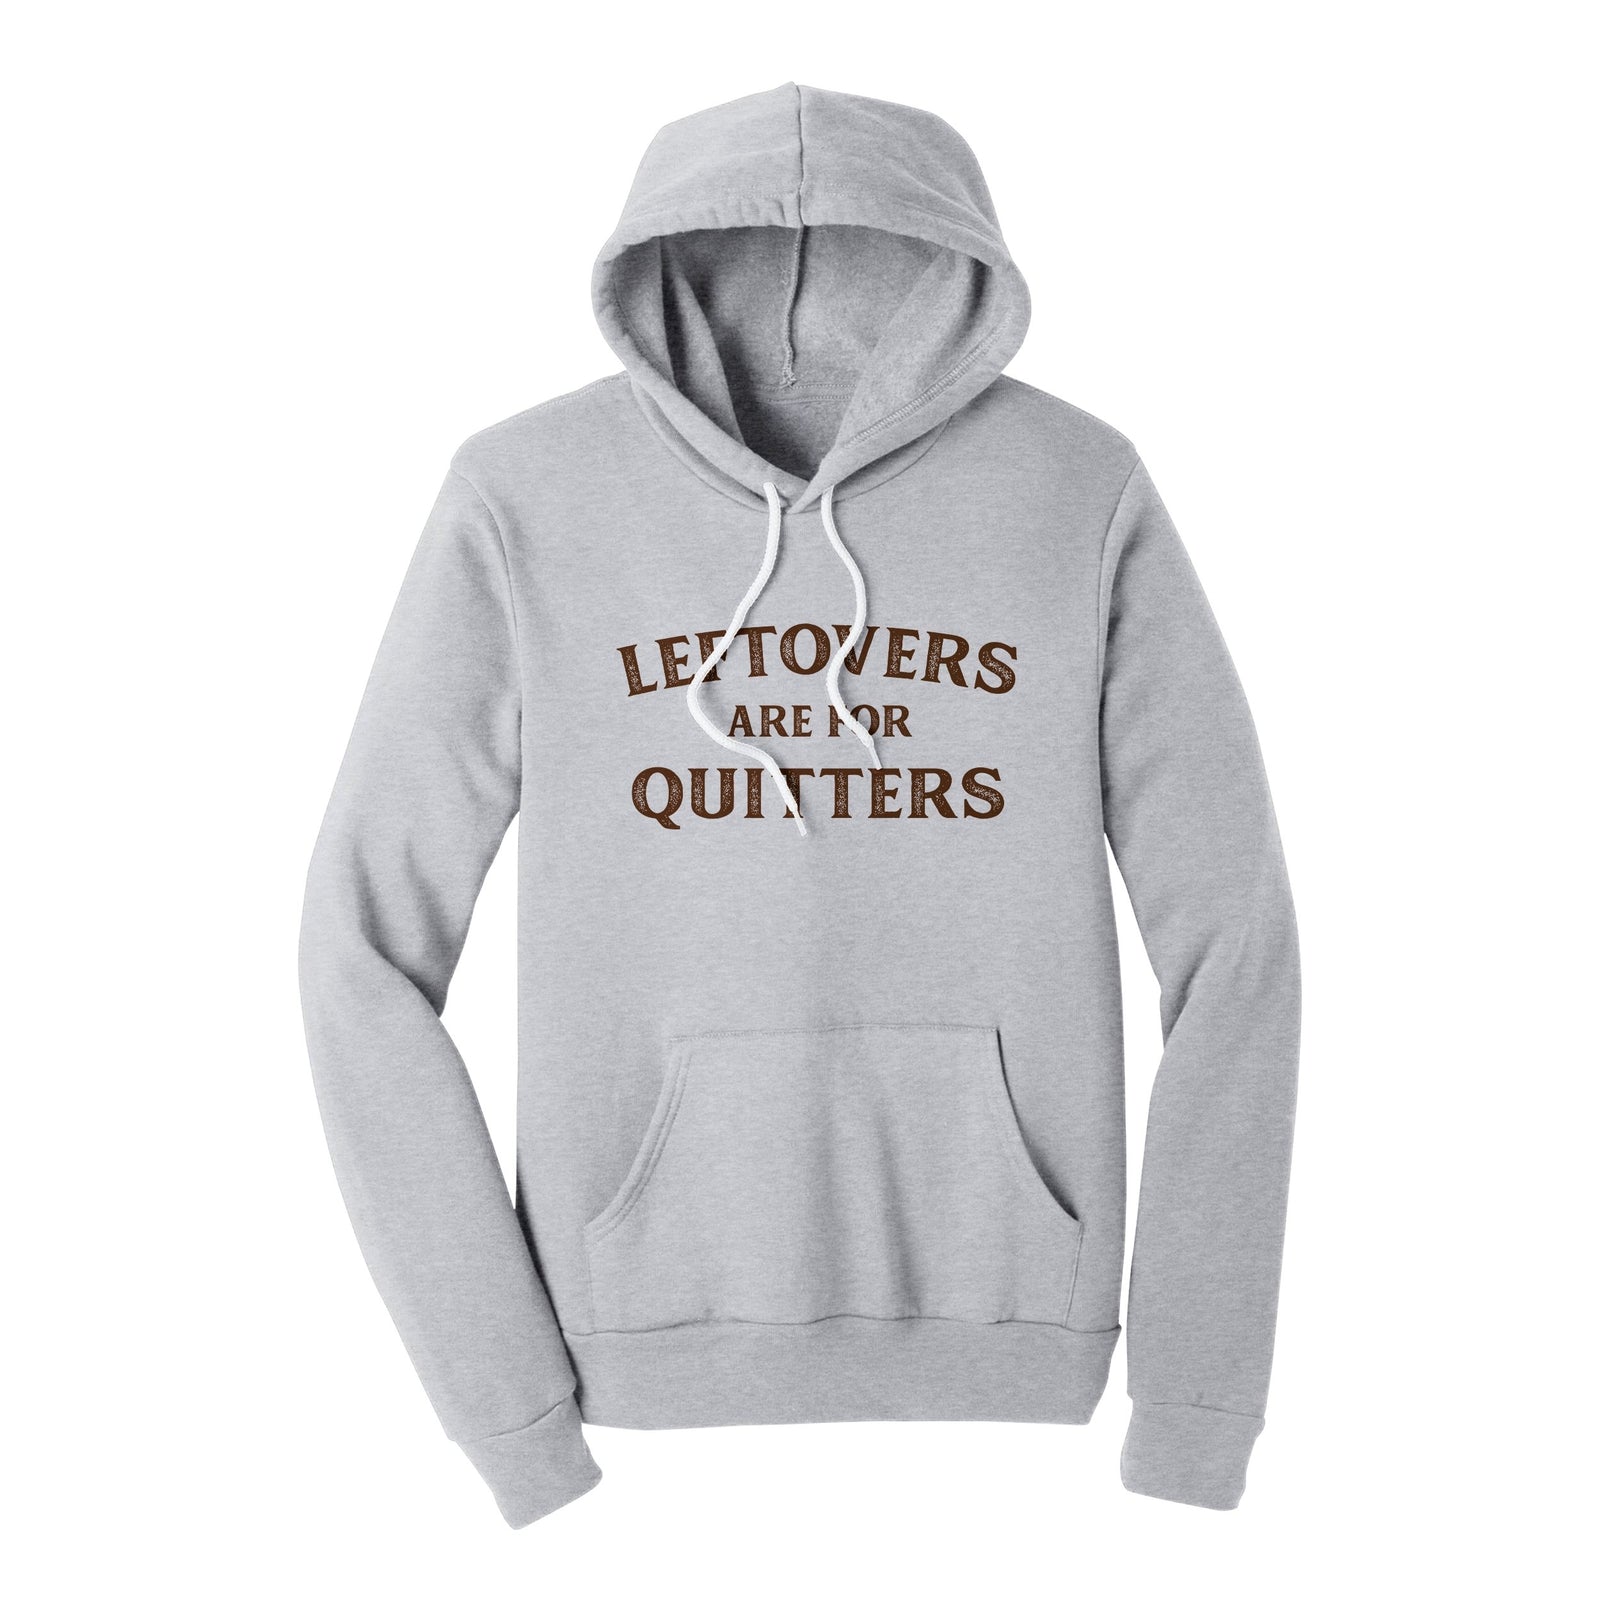 //cdn.shopify.com/s/files/1/0274/2488/2766/products/leftovers-are-for-quitters-hoodie-128485_5000x.jpg?v=1675242831 5000w,
    //cdn.shopify.com/s/files/1/0274/2488/2766/products/leftovers-are-for-quitters-hoodie-128485_4500x.jpg?v=1675242831 4500w,
    //cdn.shopify.com/s/files/1/0274/2488/2766/products/leftovers-are-for-quitters-hoodie-128485_4000x.jpg?v=1675242831 4000w,
    //cdn.shopify.com/s/files/1/0274/2488/2766/products/leftovers-are-for-quitters-hoodie-128485_3500x.jpg?v=1675242831 3500w,
    //cdn.shopify.com/s/files/1/0274/2488/2766/products/leftovers-are-for-quitters-hoodie-128485_3000x.jpg?v=1675242831 3000w,
    //cdn.shopify.com/s/files/1/0274/2488/2766/products/leftovers-are-for-quitters-hoodie-128485_2500x.jpg?v=1675242831 2500w,
    //cdn.shopify.com/s/files/1/0274/2488/2766/products/leftovers-are-for-quitters-hoodie-128485_2000x.jpg?v=1675242831 2000w,
    //cdn.shopify.com/s/files/1/0274/2488/2766/products/leftovers-are-for-quitters-hoodie-128485_1800x.jpg?v=1675242831 1800w,
    //cdn.shopify.com/s/files/1/0274/2488/2766/products/leftovers-are-for-quitters-hoodie-128485_1600x.jpg?v=1675242831 1600w,
    //cdn.shopify.com/s/files/1/0274/2488/2766/products/leftovers-are-for-quitters-hoodie-128485_1400x.jpg?v=1675242831 1400w,
    //cdn.shopify.com/s/files/1/0274/2488/2766/products/leftovers-are-for-quitters-hoodie-128485_1200x.jpg?v=1675242831 1200w,
    //cdn.shopify.com/s/files/1/0274/2488/2766/products/leftovers-are-for-quitters-hoodie-128485_1000x.jpg?v=1675242831 1000w,
    //cdn.shopify.com/s/files/1/0274/2488/2766/products/leftovers-are-for-quitters-hoodie-128485_800x.jpg?v=1675242831 800w,
    //cdn.shopify.com/s/files/1/0274/2488/2766/products/leftovers-are-for-quitters-hoodie-128485_600x.jpg?v=1675242831 600w,
    //cdn.shopify.com/s/files/1/0274/2488/2766/products/leftovers-are-for-quitters-hoodie-128485_400x.jpg?v=1675242831 400w,
    //cdn.shopify.com/s/files/1/0274/2488/2766/products/leftovers-are-for-quitters-hoodie-128485_200x.jpg?v=1675242831 200w